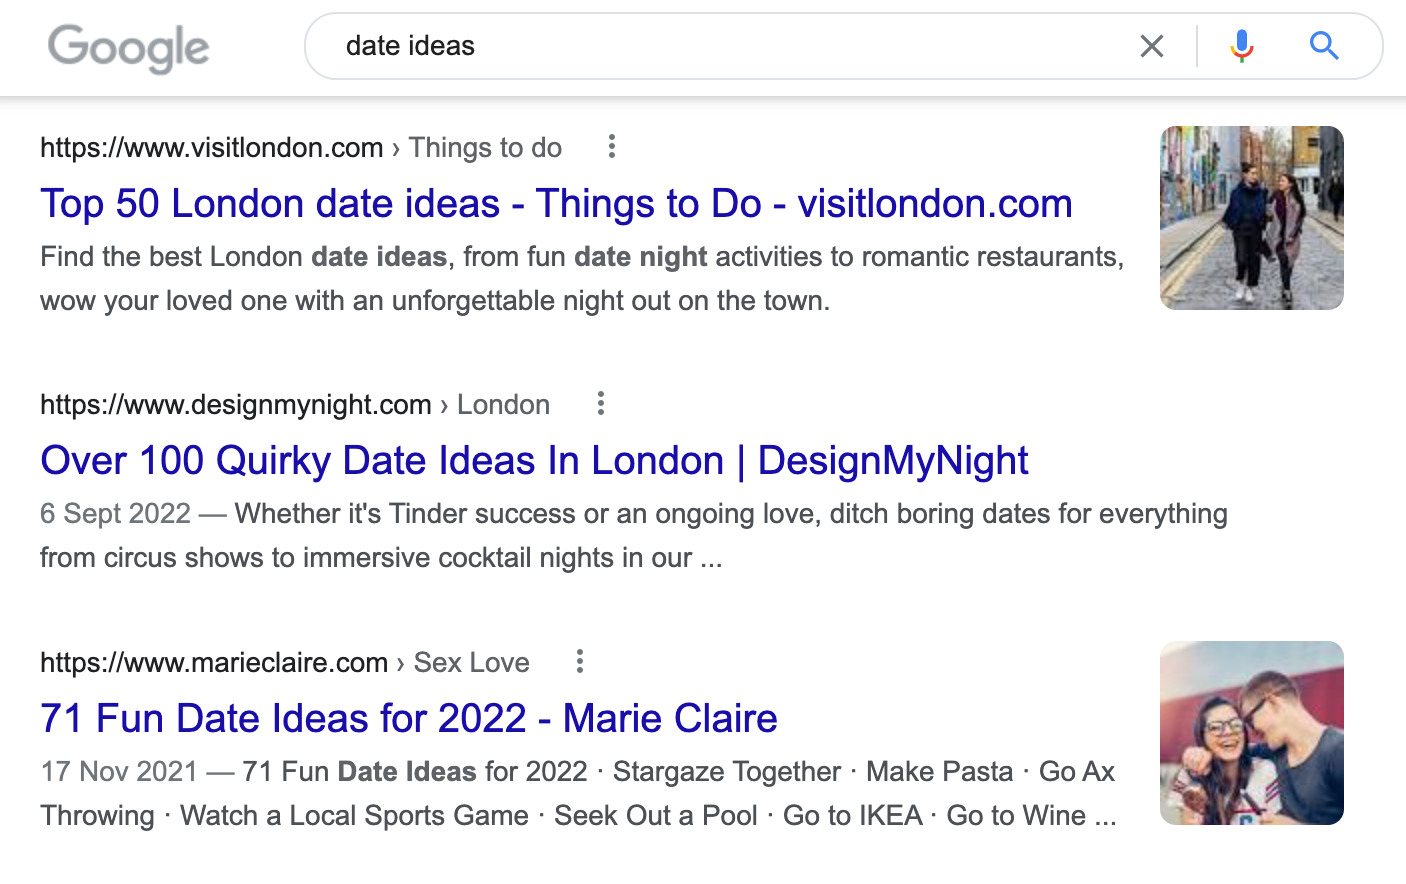 SERP for the query "date ideas"